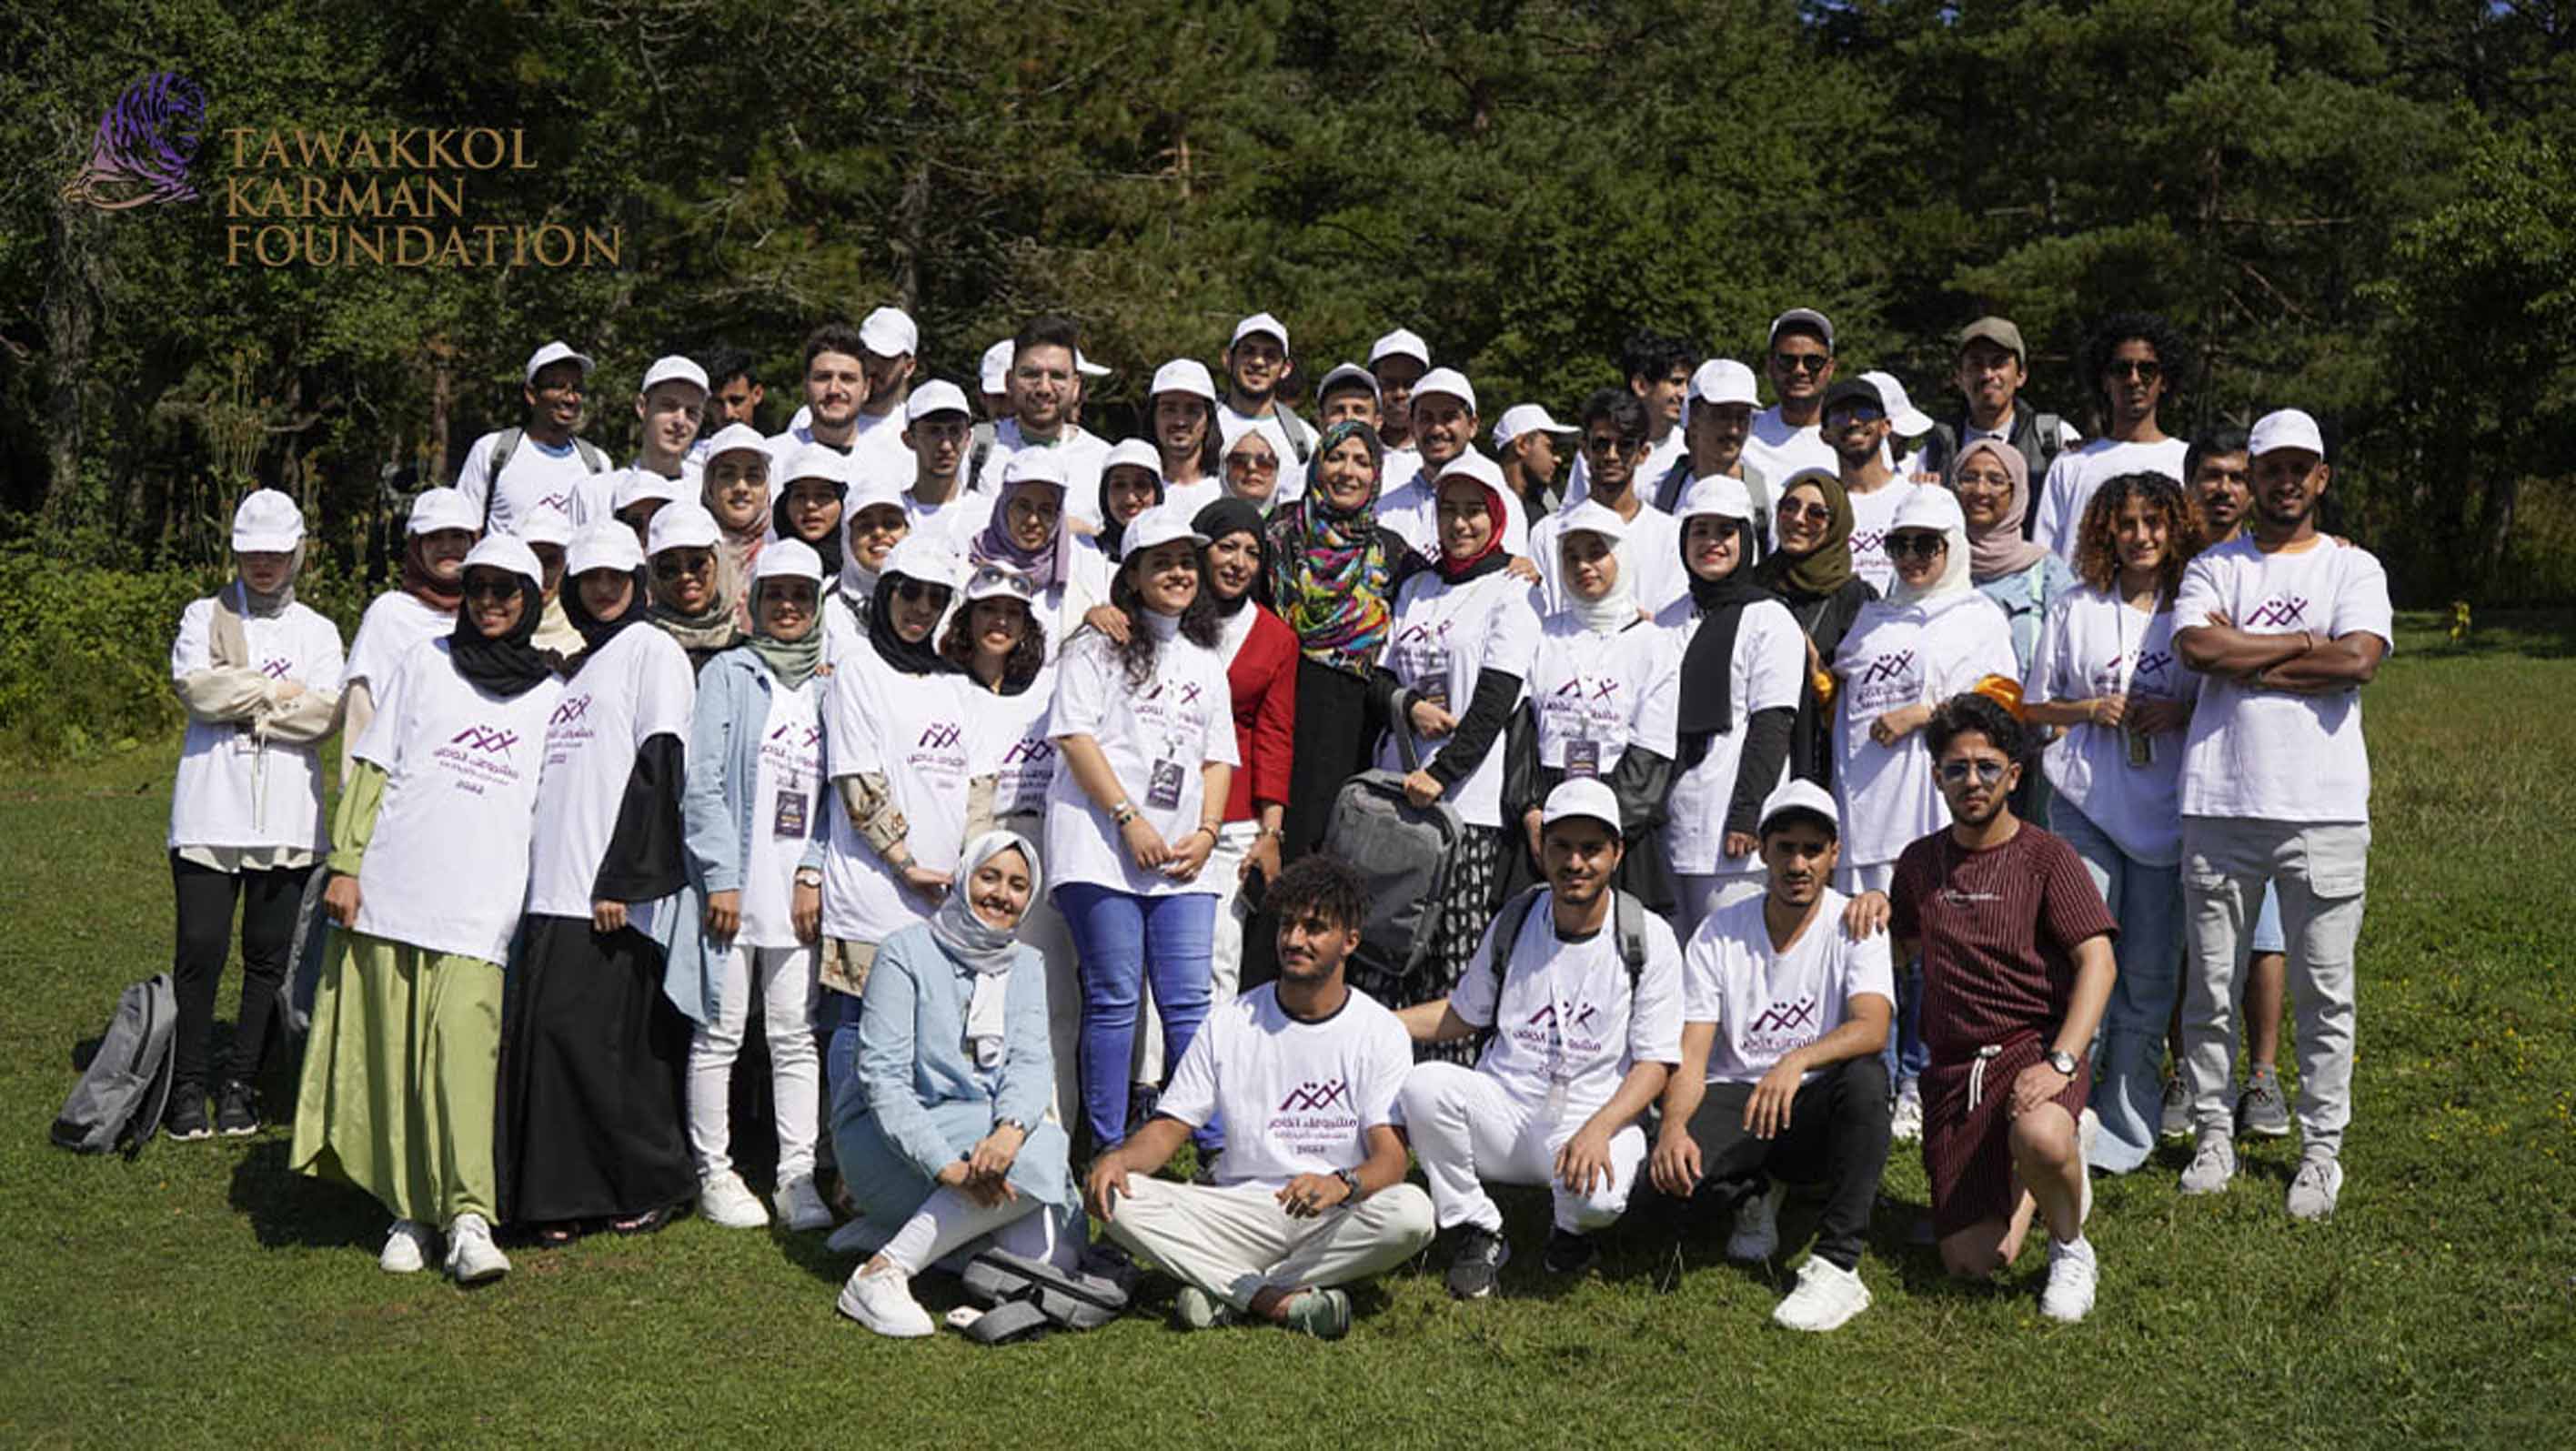 Tawakkol Karman Foundation concludes the activities of the first summer camp "You Are Your Own" in the Turkish city of Bolu